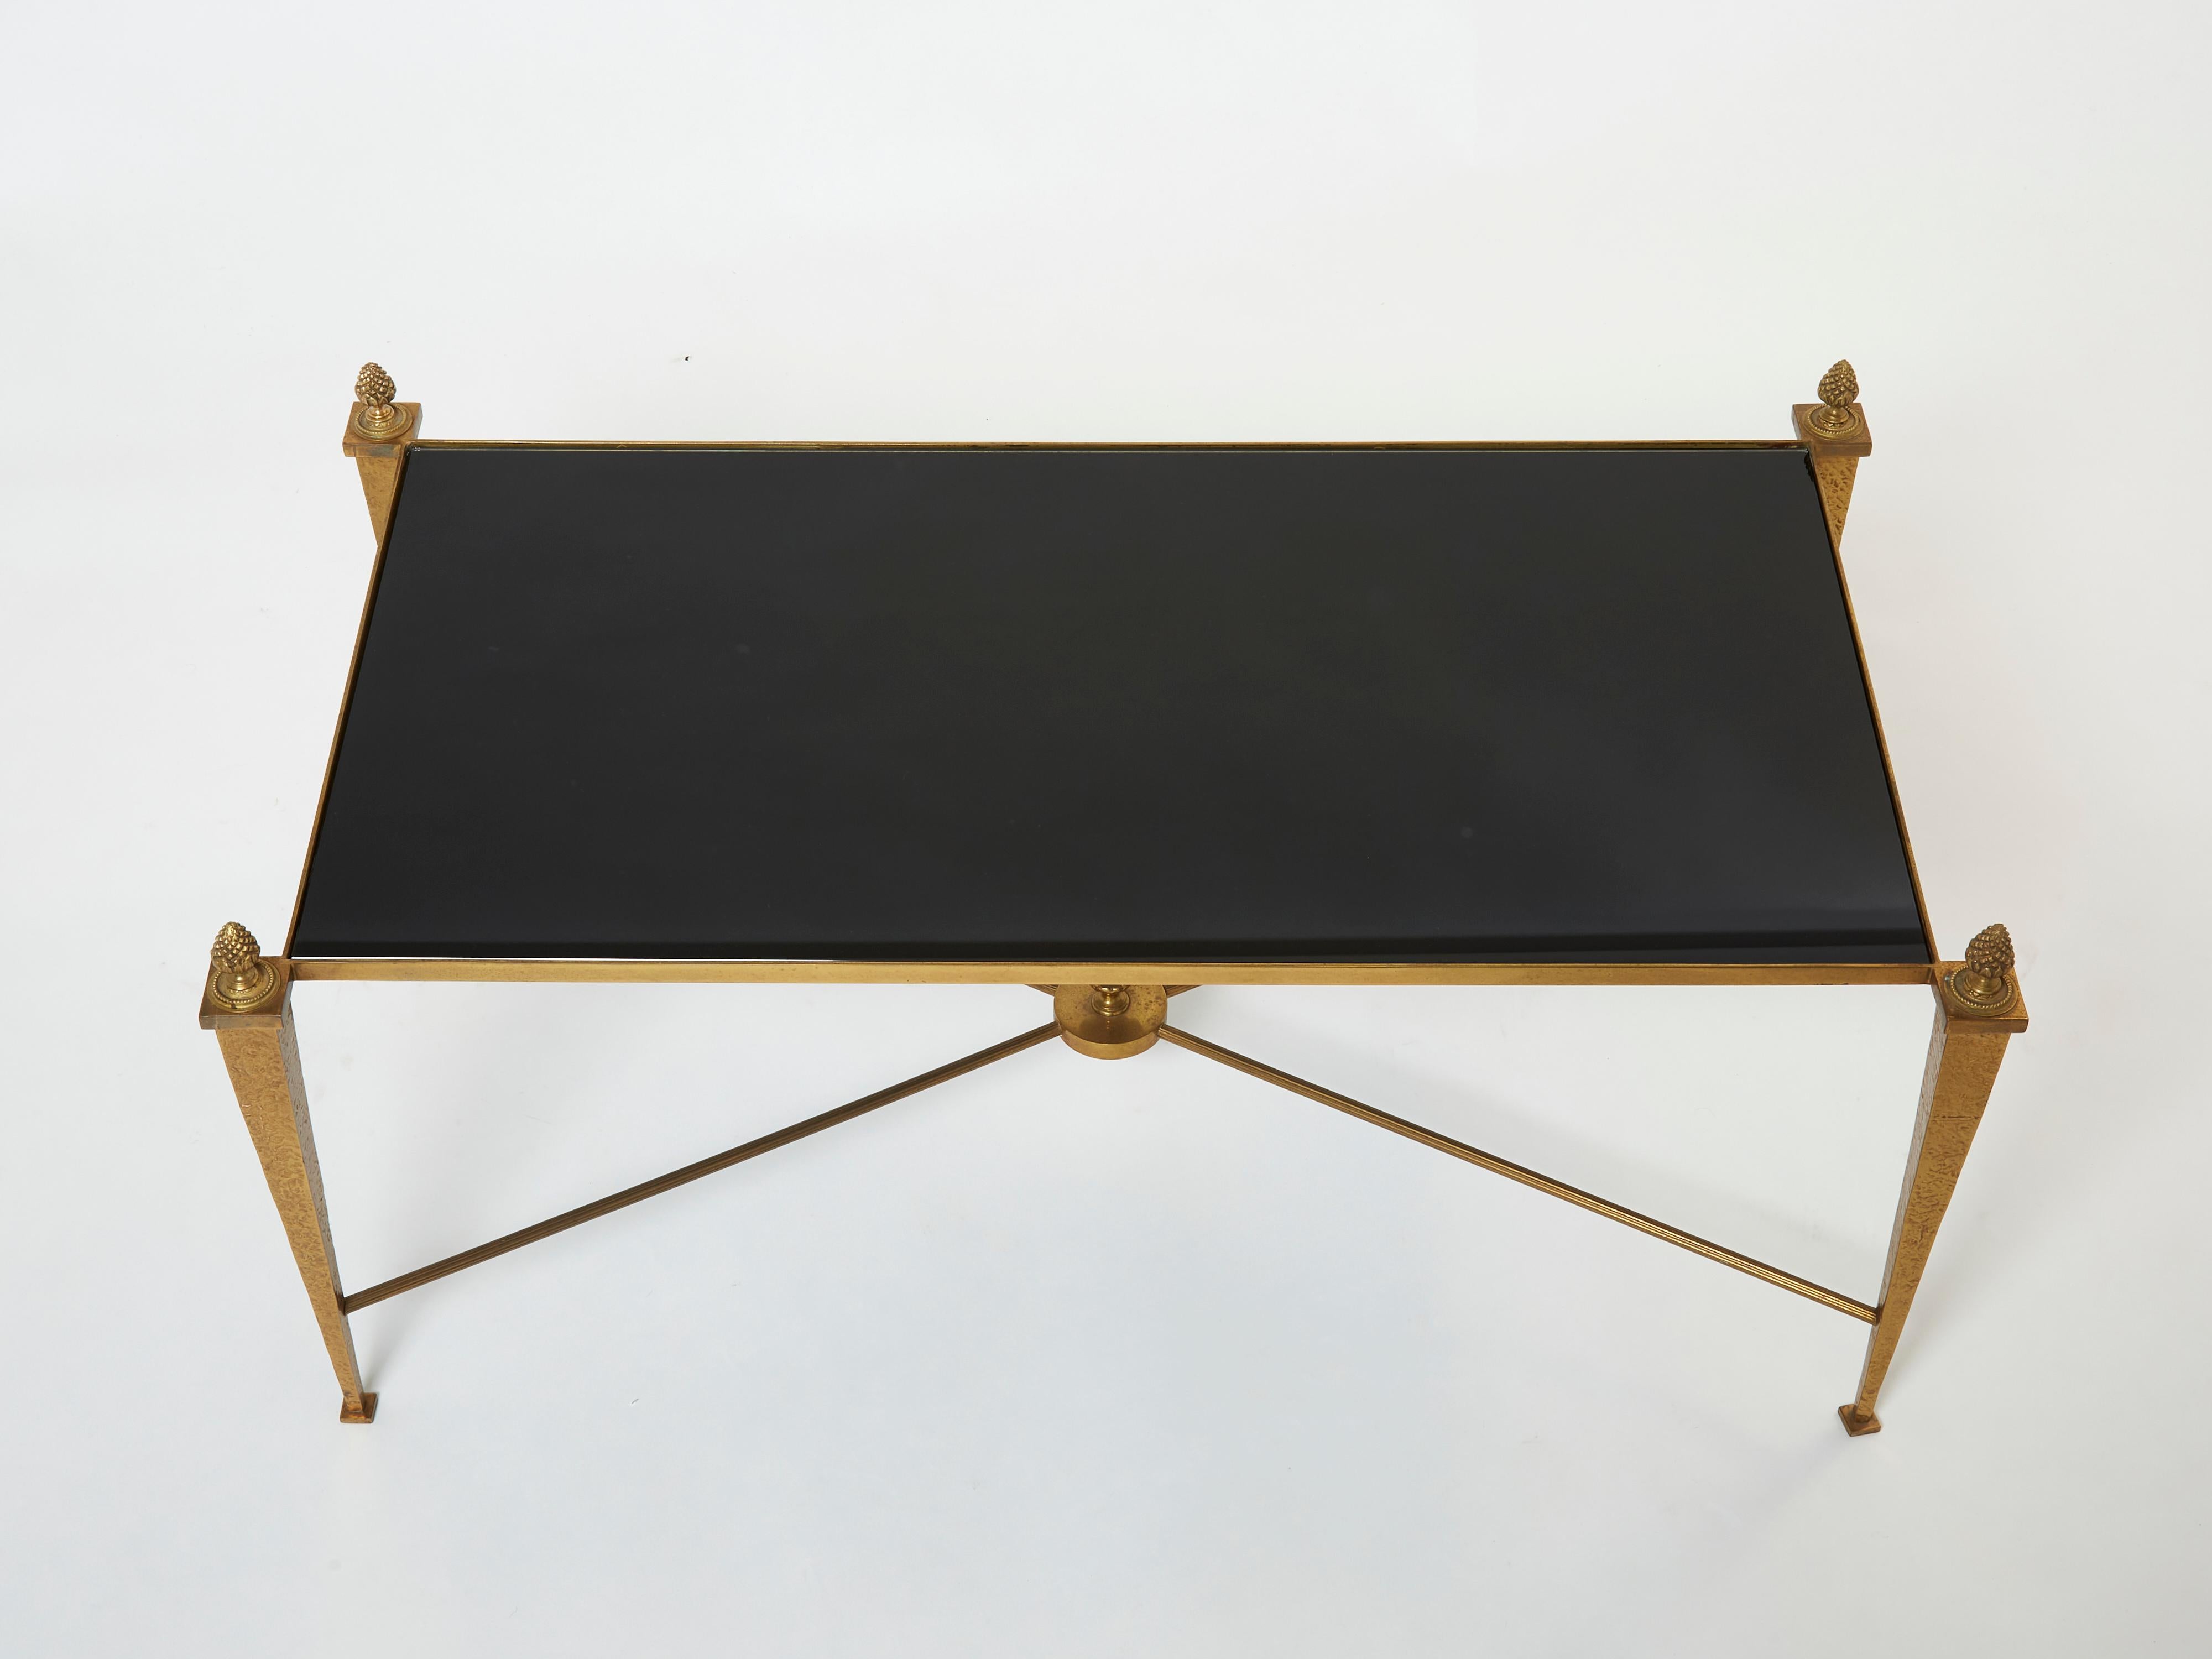 Opaline Glass French Maison Ramsay Gilded Wrought Iron Opaline Coffee Table, 1960s For Sale